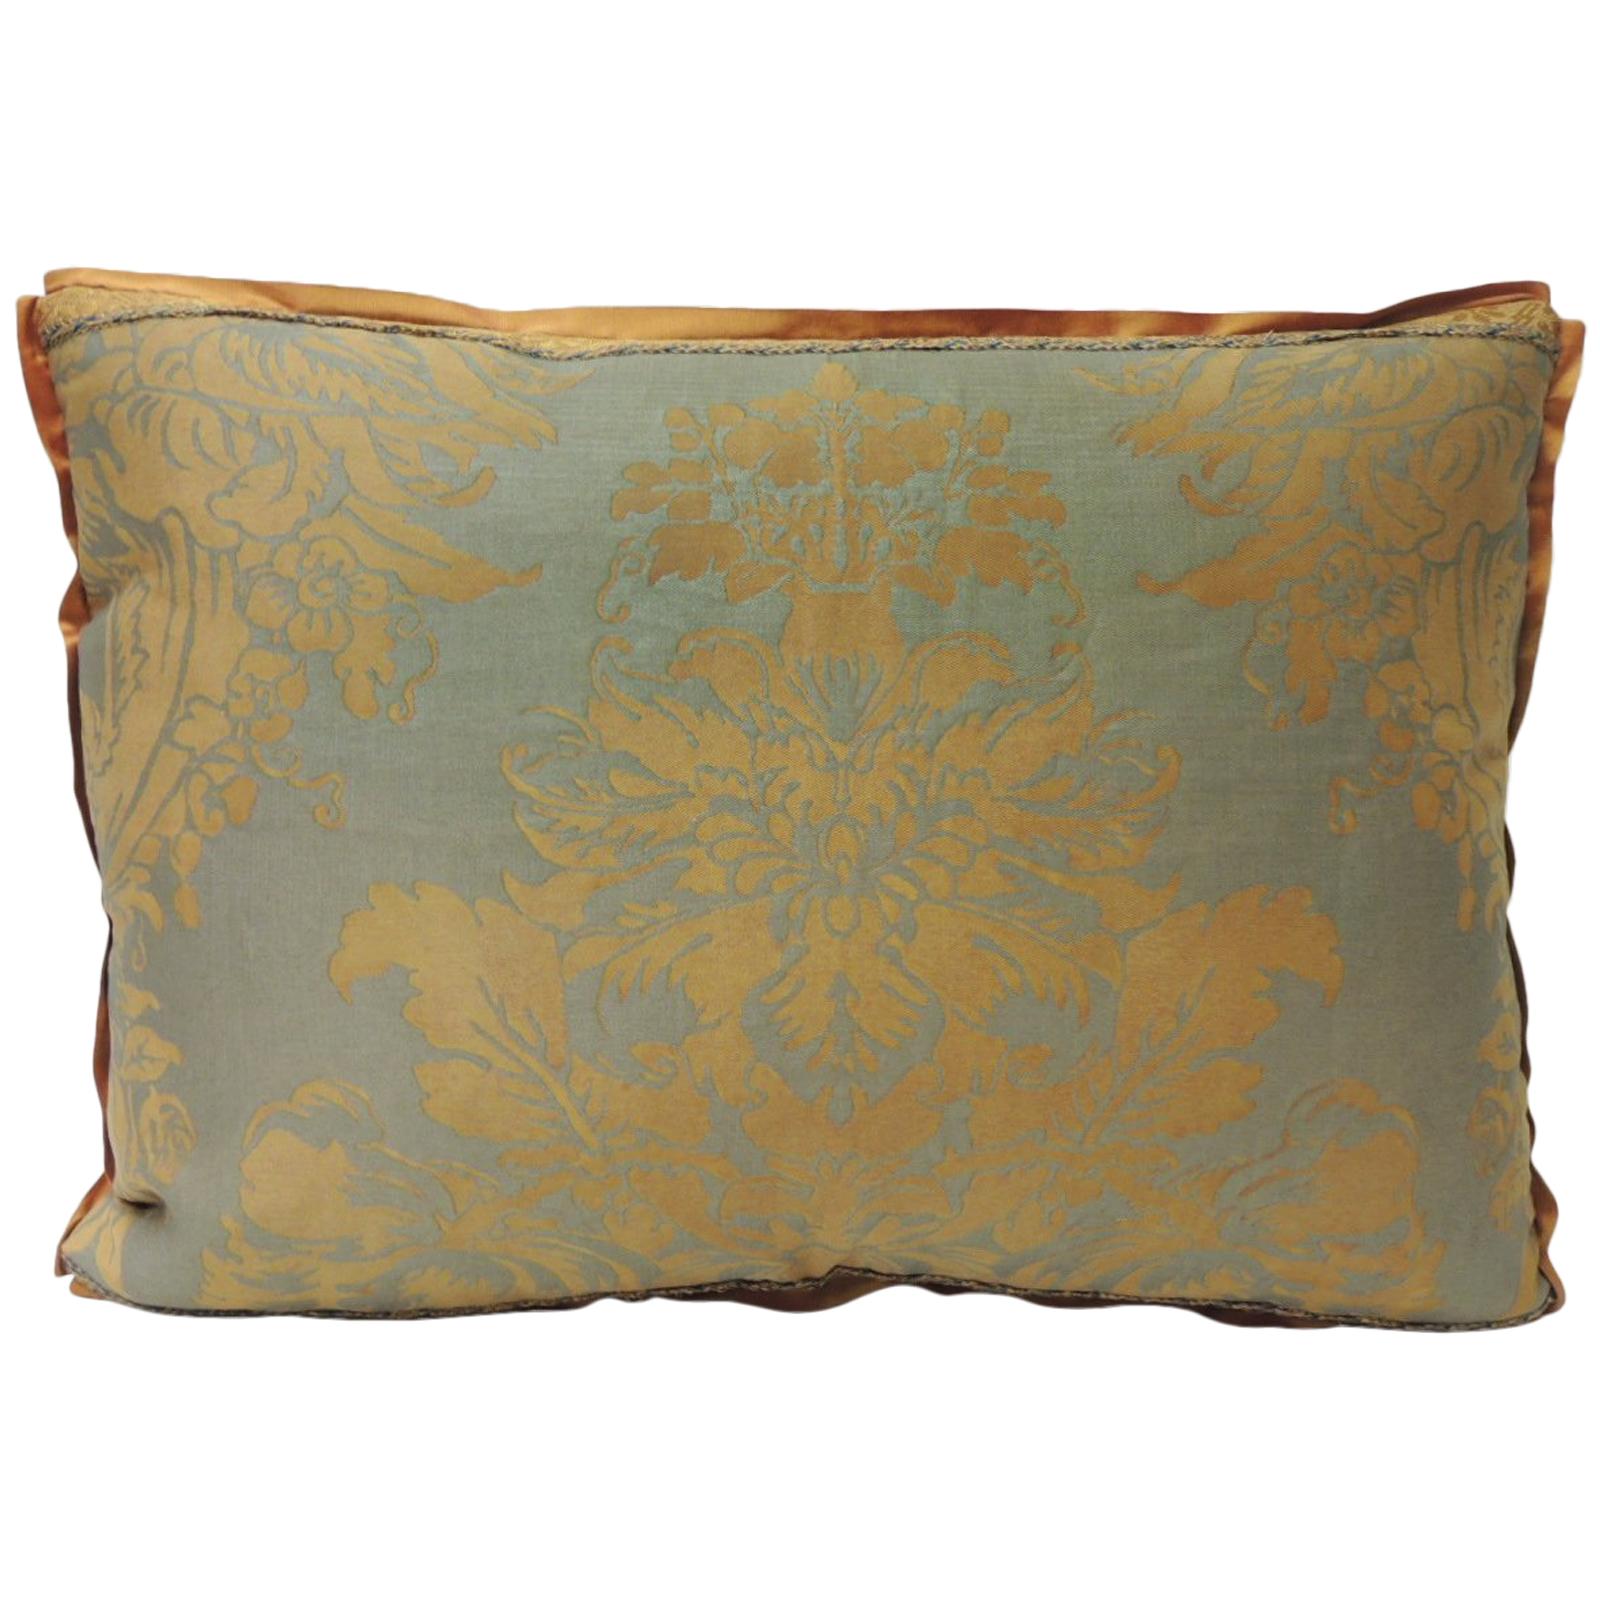 Fortuny Vintage Burn Orange and Silvery "Medici" Decorative Pillow